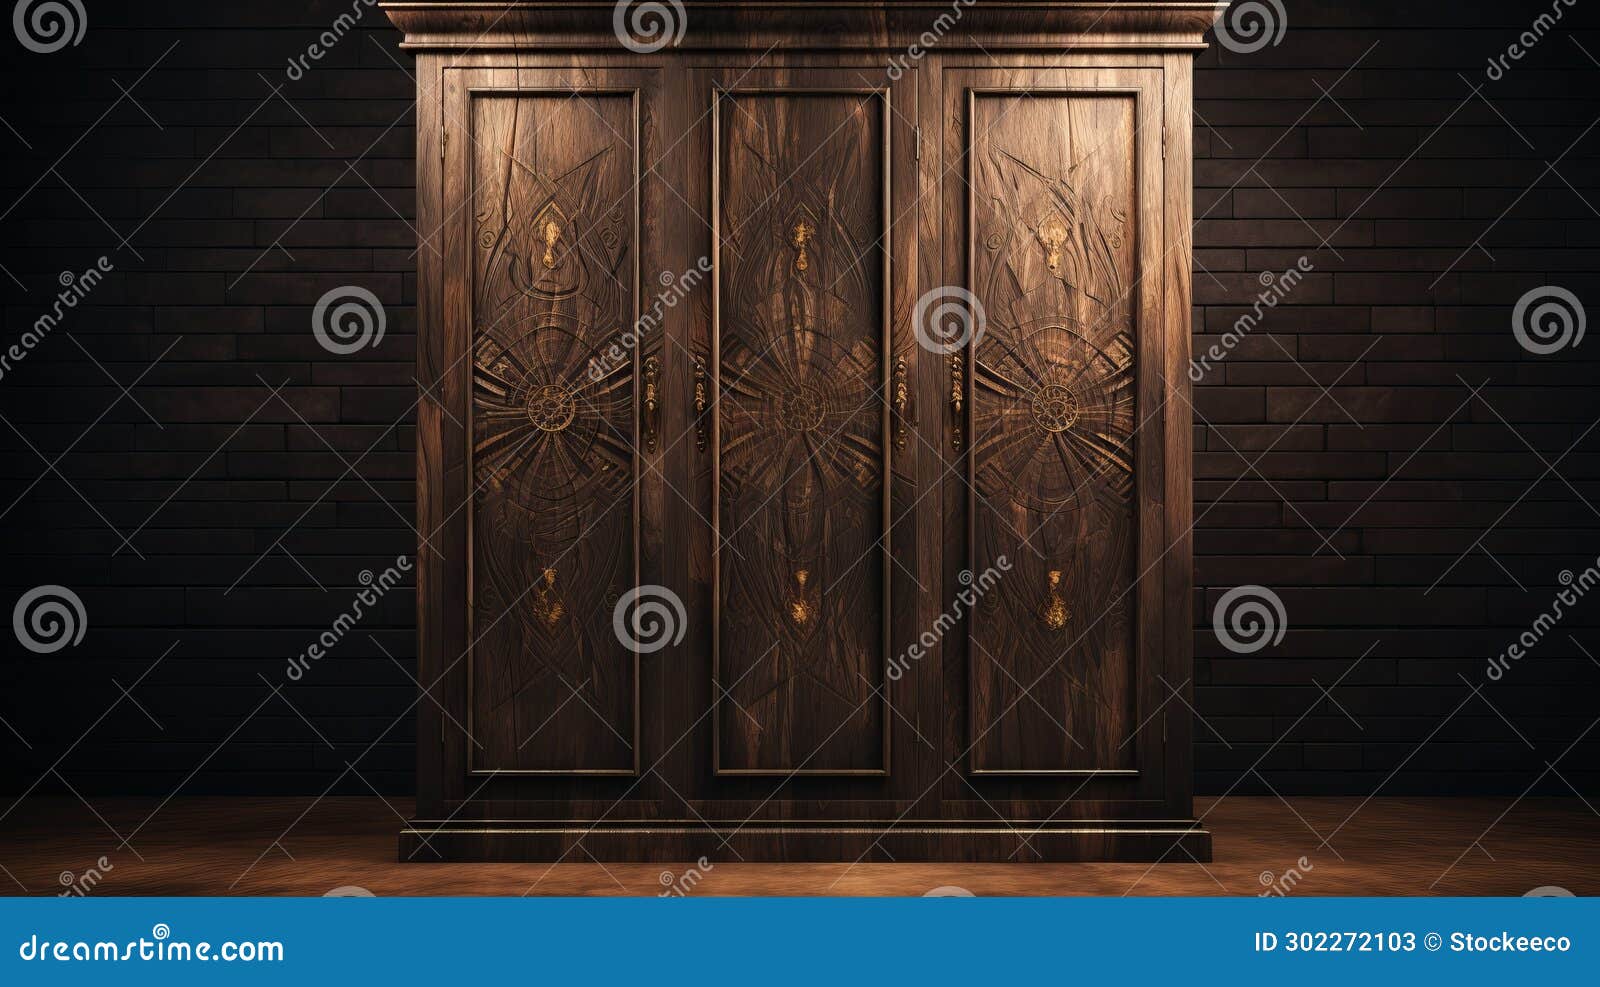 elaborate wooden wardrobe with mystic ism and symmetrical 